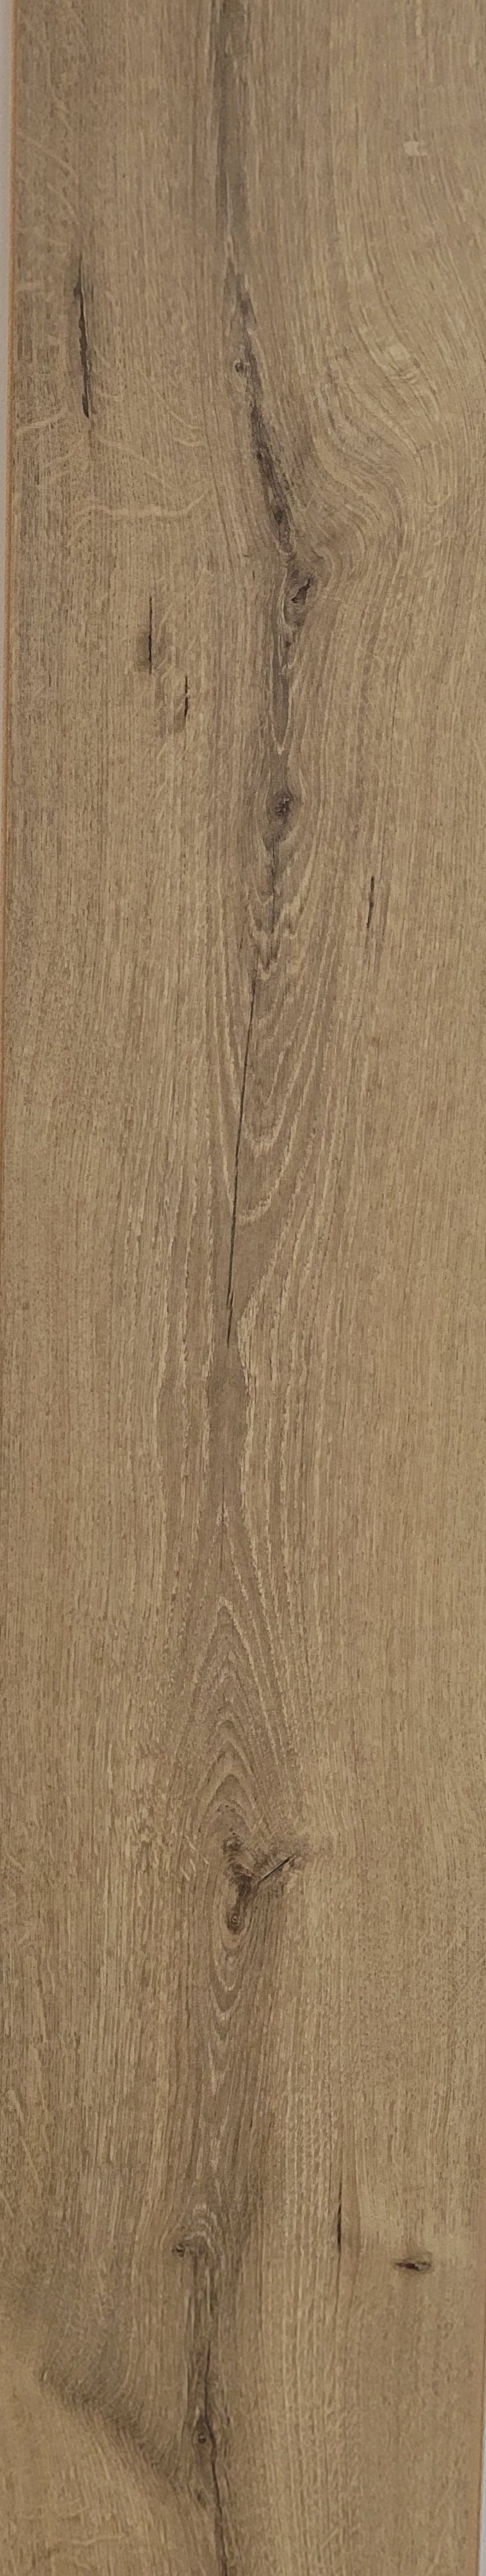 Laminate | About Floors N' More